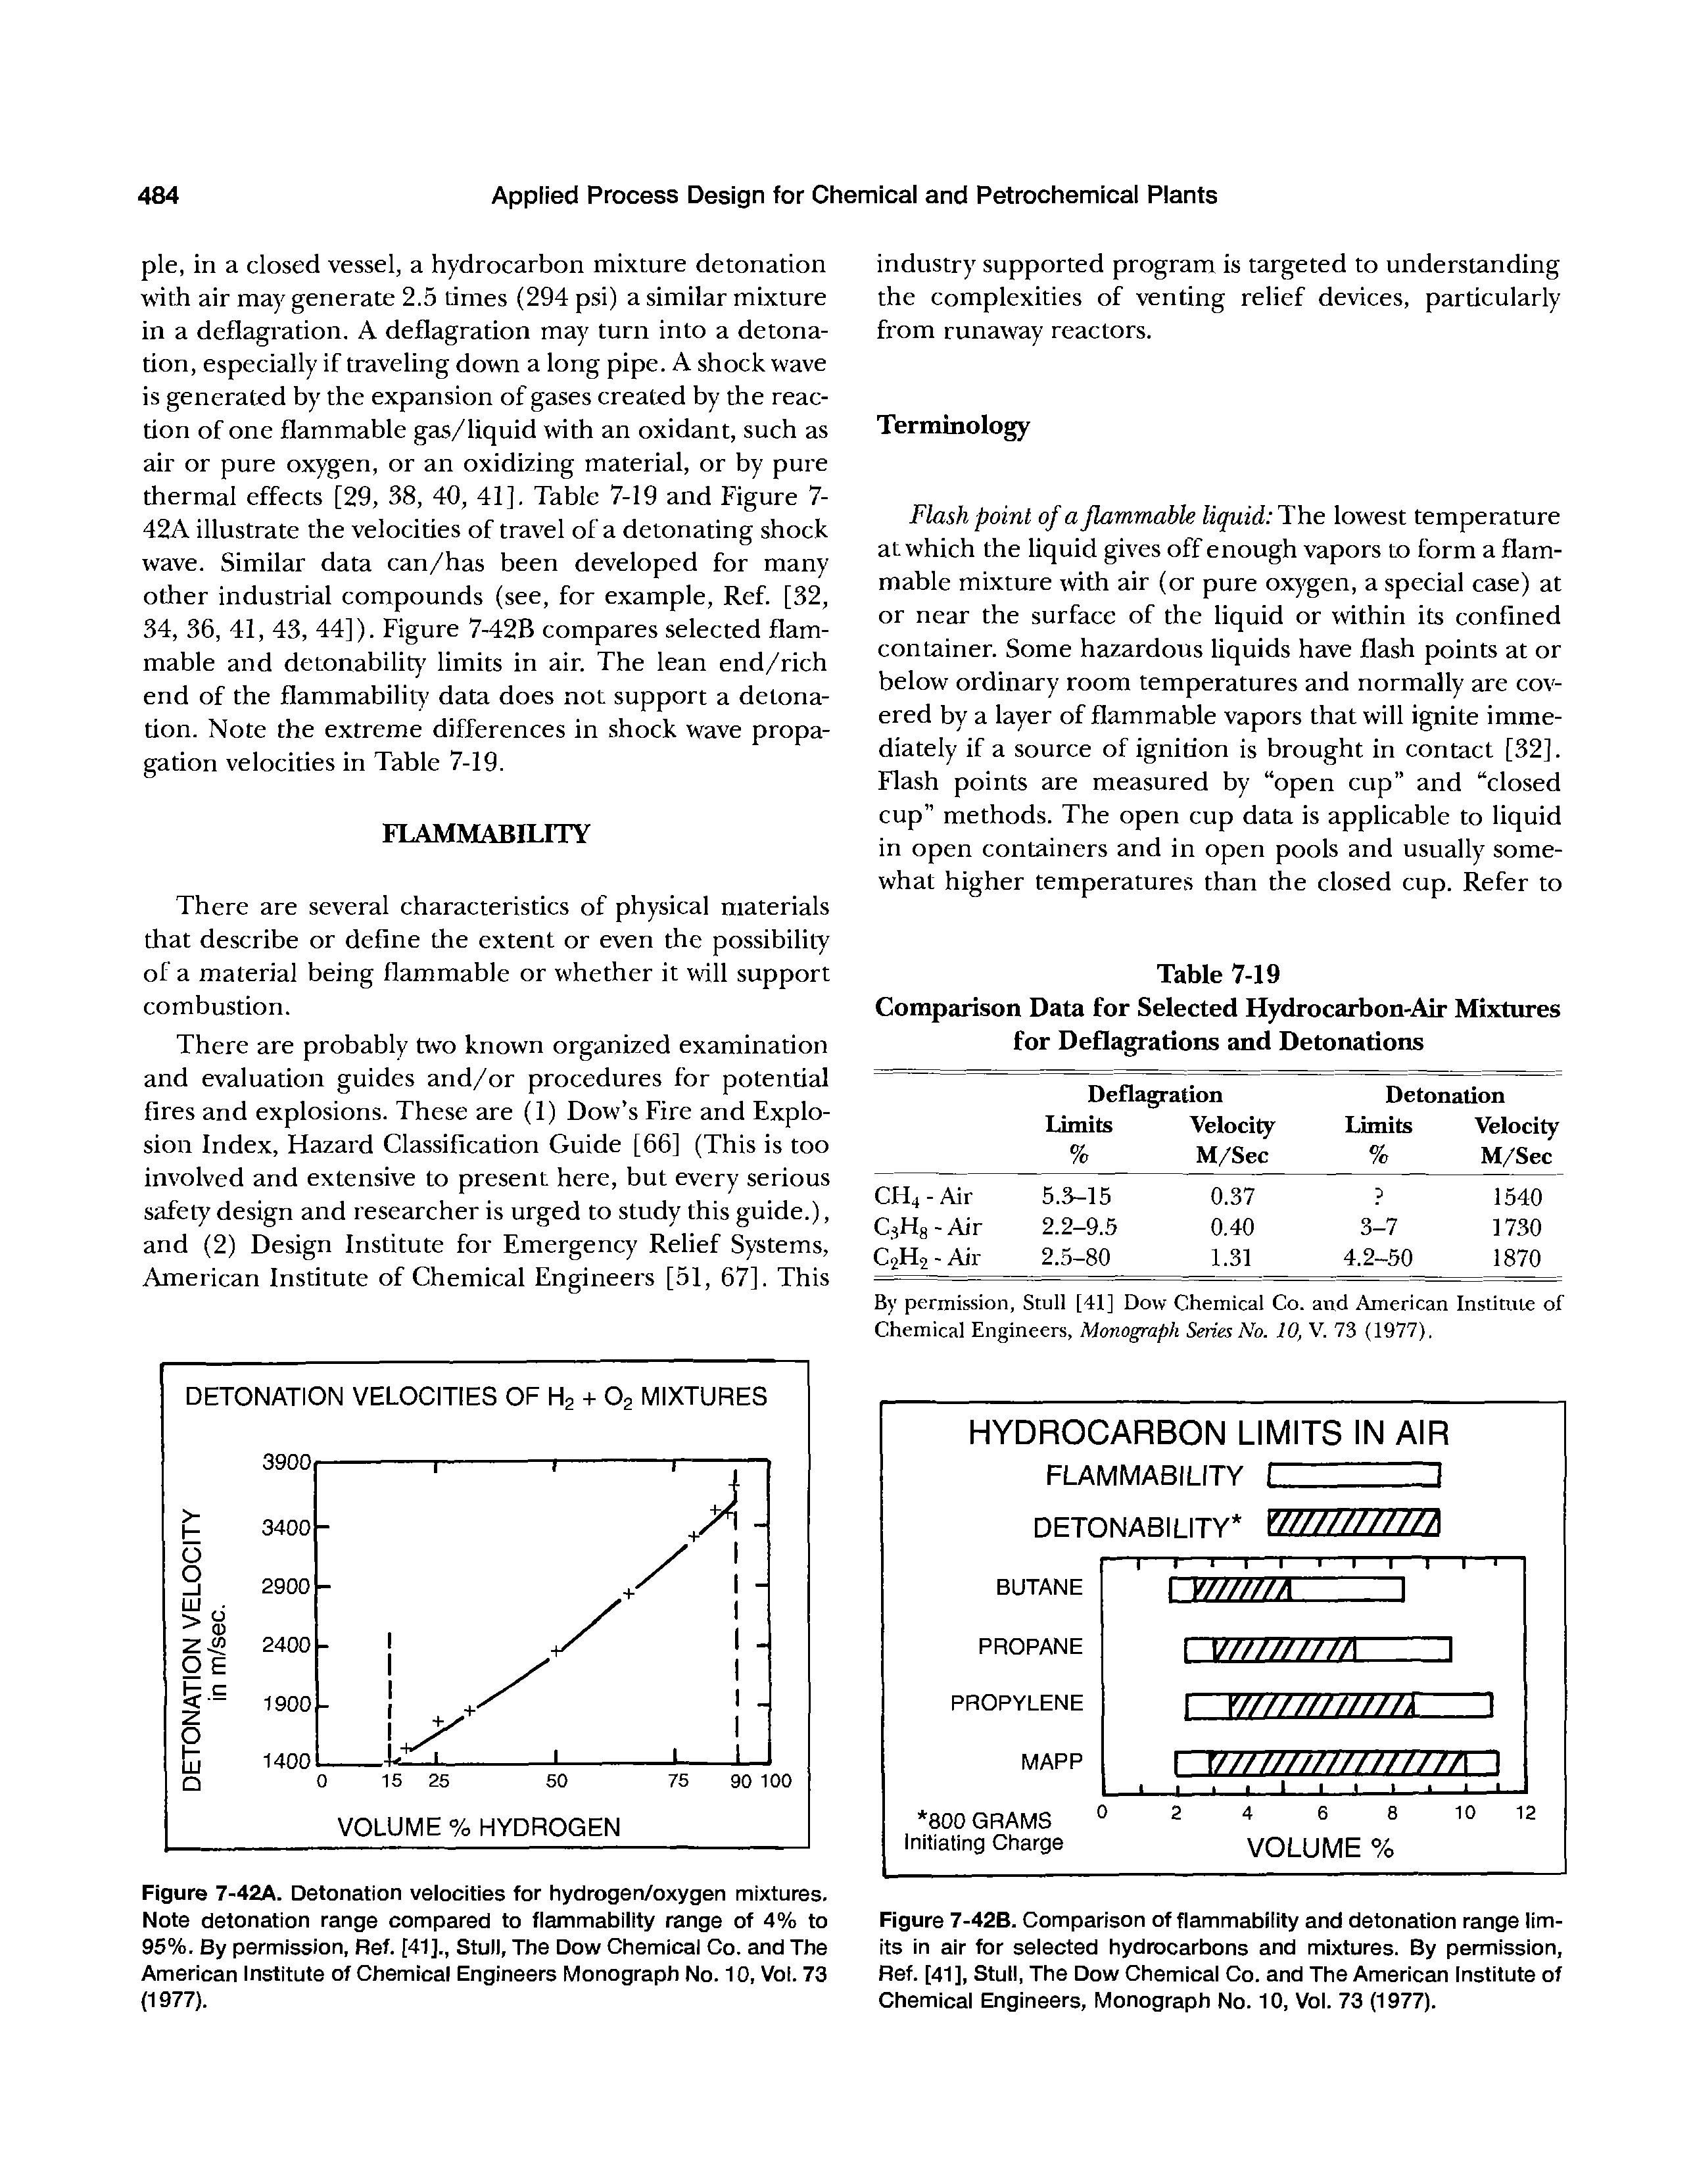 Figure 7-42B. Comparison of flammability and detonation range limits in air for selected hydrocarbons and mixtures. By permission, Ref. [41], Stull, The Dow Chemical Co. and The American Institute of Chemical Engineers, Monograph No. 10, Vol. 73 (1977).